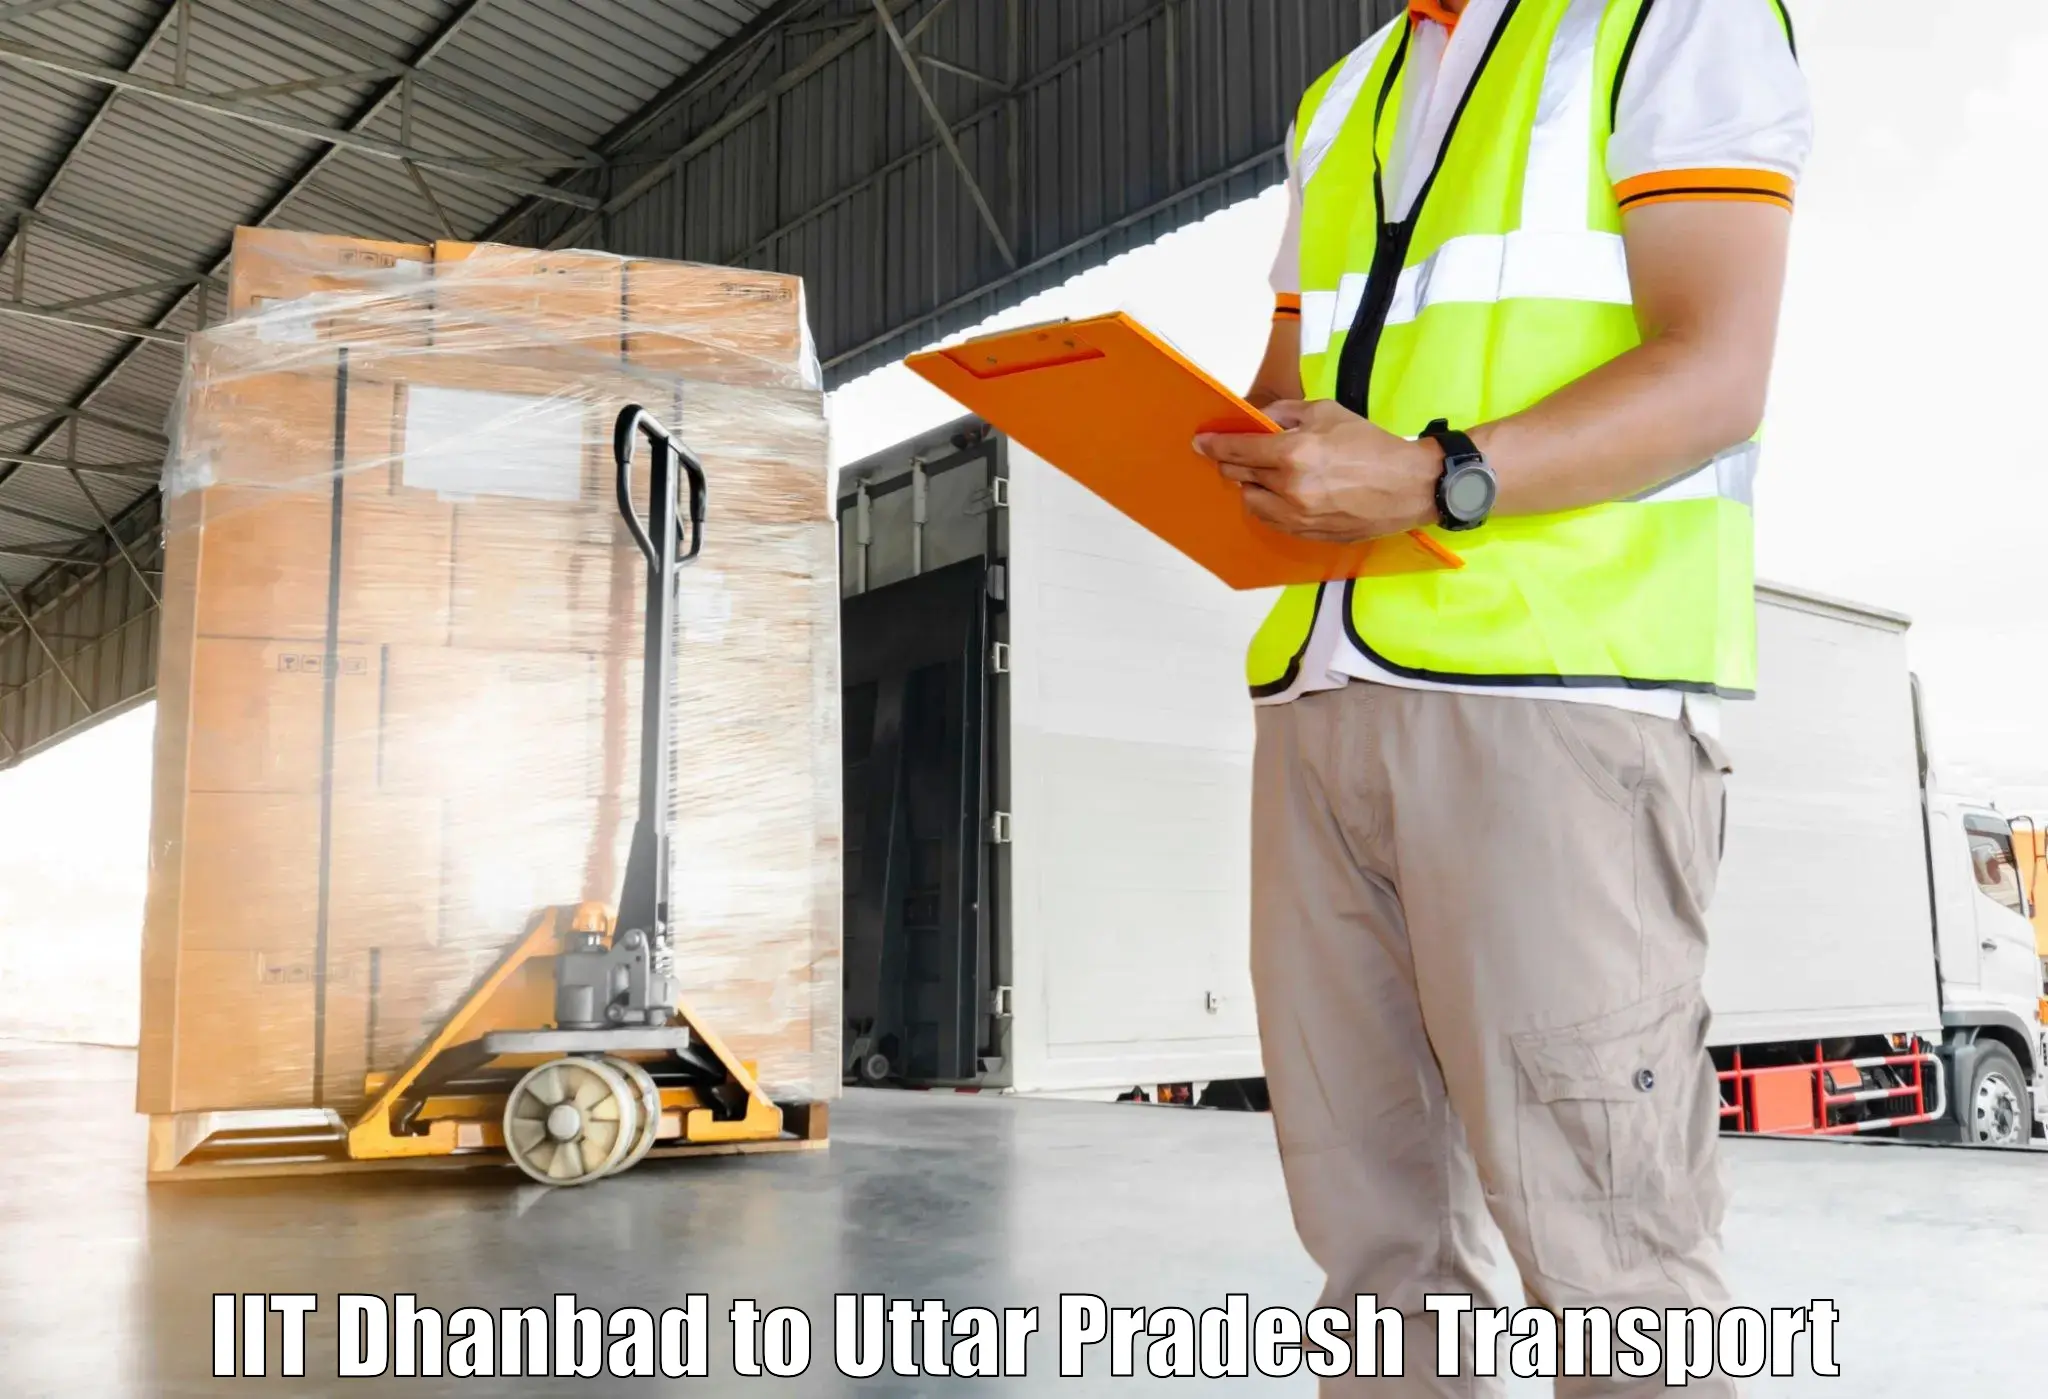 Two wheeler transport services IIT Dhanbad to Khair